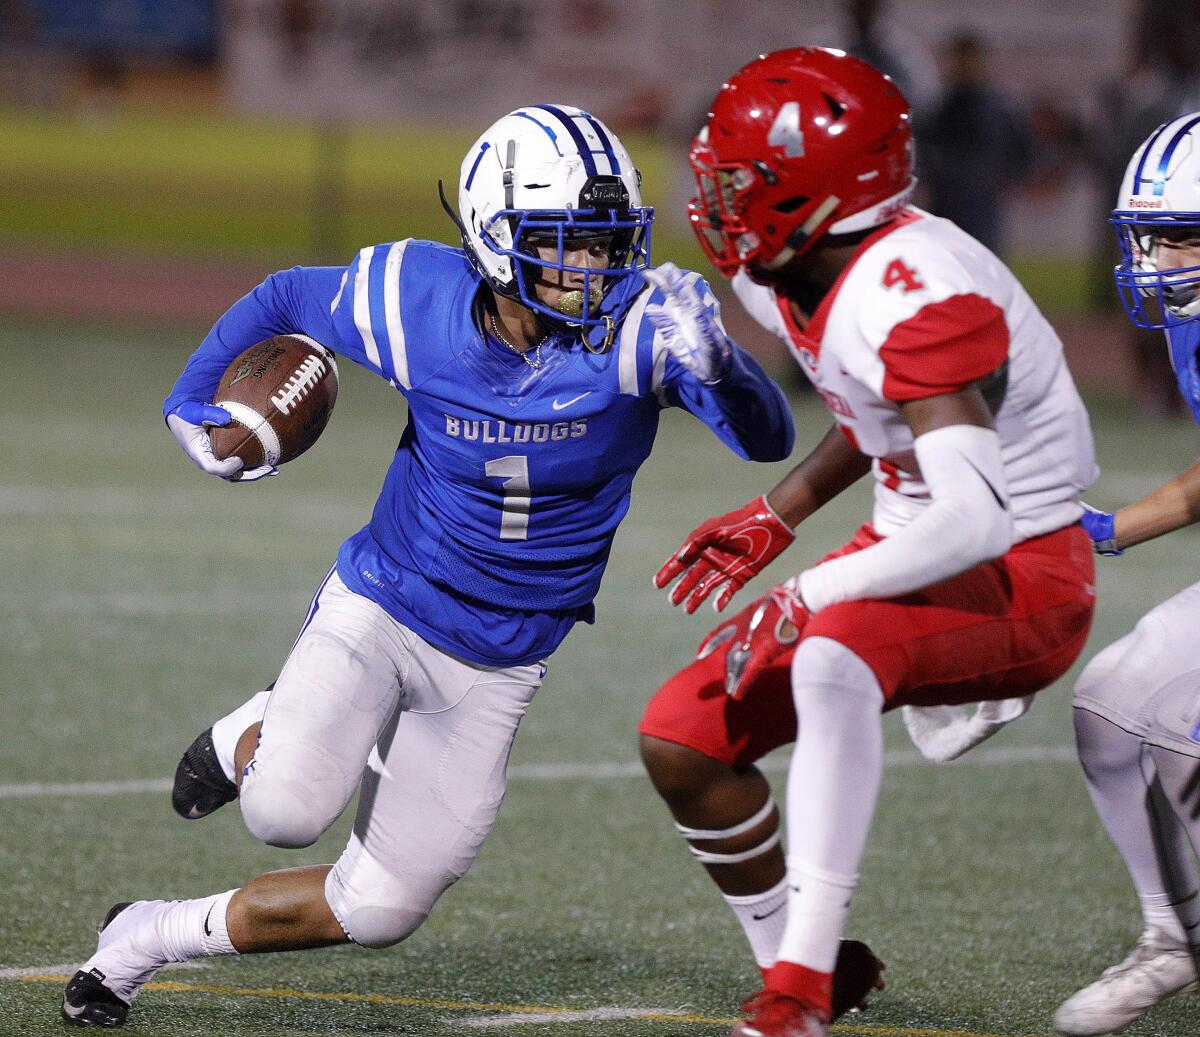 Isaac Glover and the Burbank High football team will take on visiting Muir in a Pacific League game Friday.